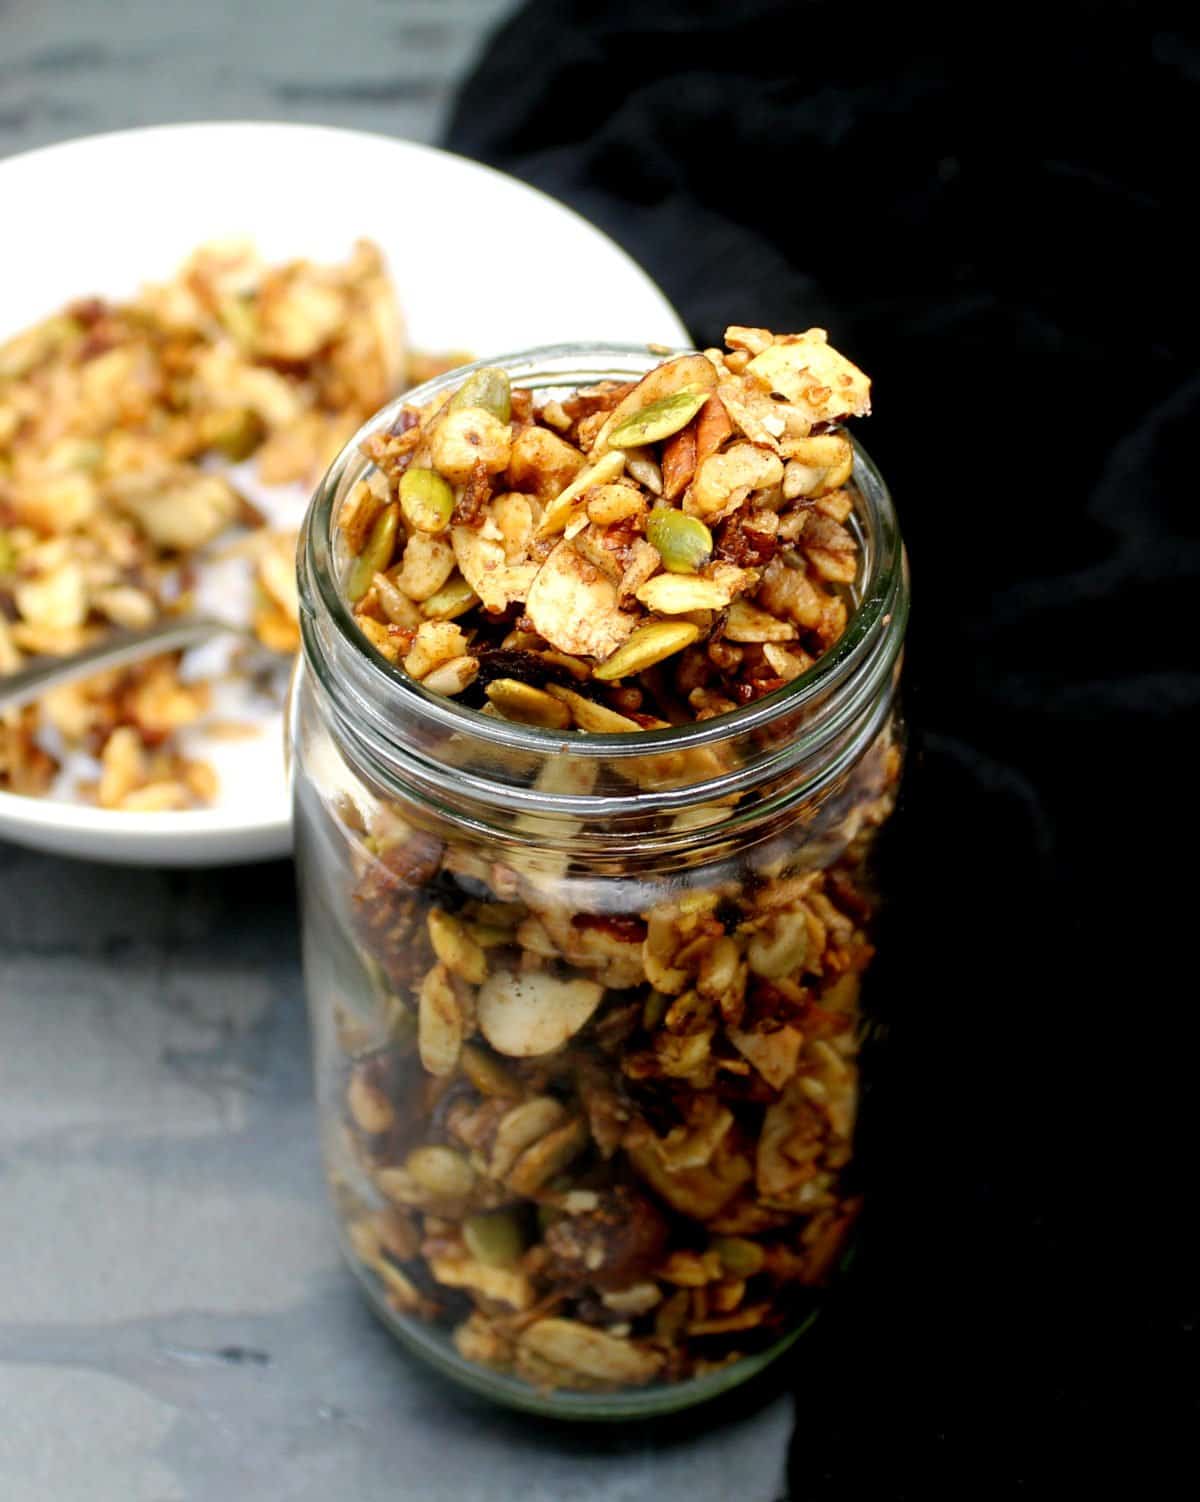 Vegan keto granola in glass jar. Behind it is a white bowl with granola and almond milk.